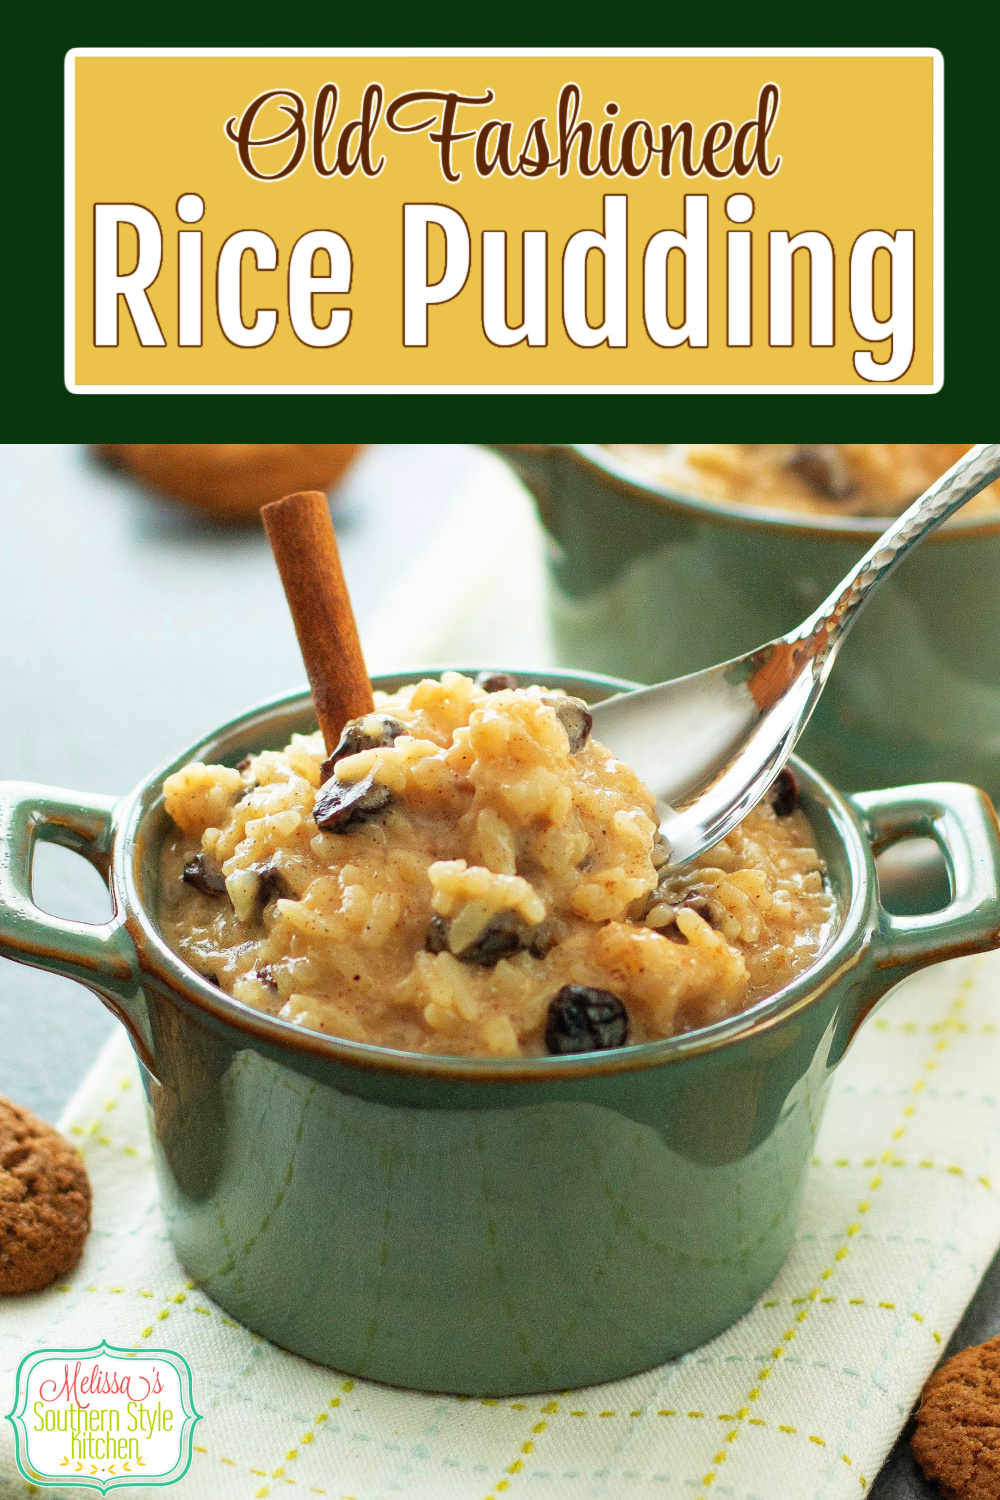 This old fashioned Rice Pudding Recipe features hints of cinnamon with a touch of nutmeg and cardamom along with chewy raisins for texture. #ricepuddingrecipe #easyricepudding #raisins #ricerecipes #howdoyoumakerice #cookedrice #desserts #easydessertrecipes #southernrice #cinnamonricepudding via @melissasssk